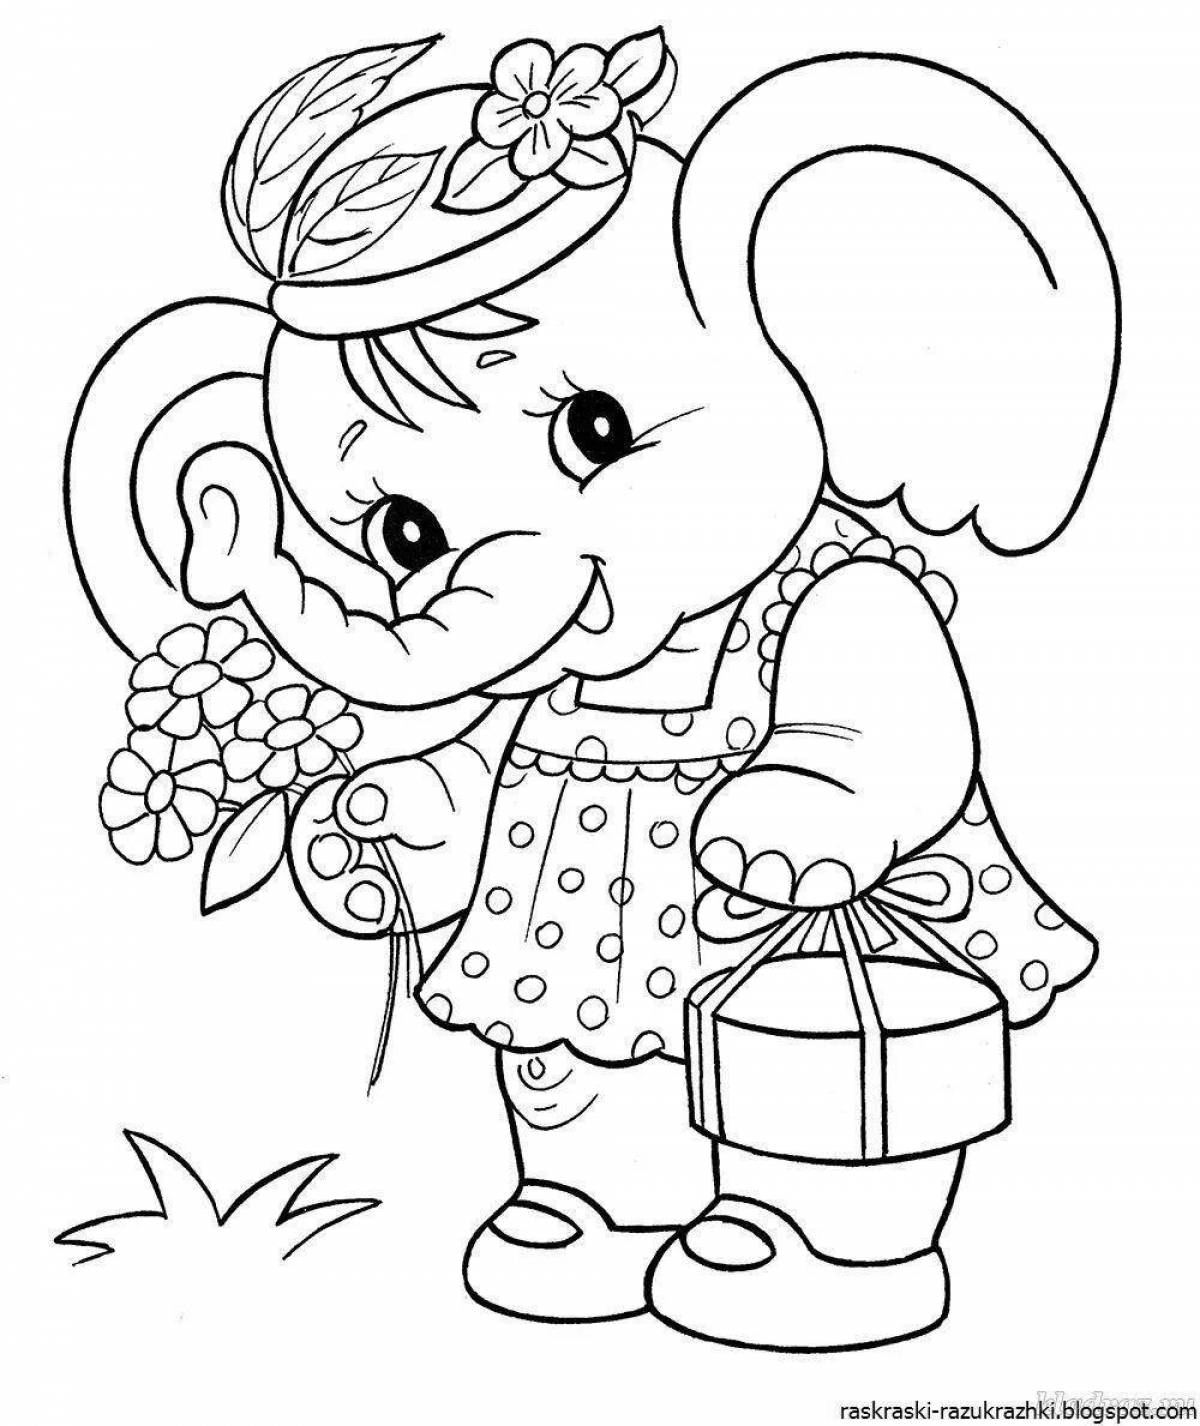 Coloring book for girls 6-7 years old